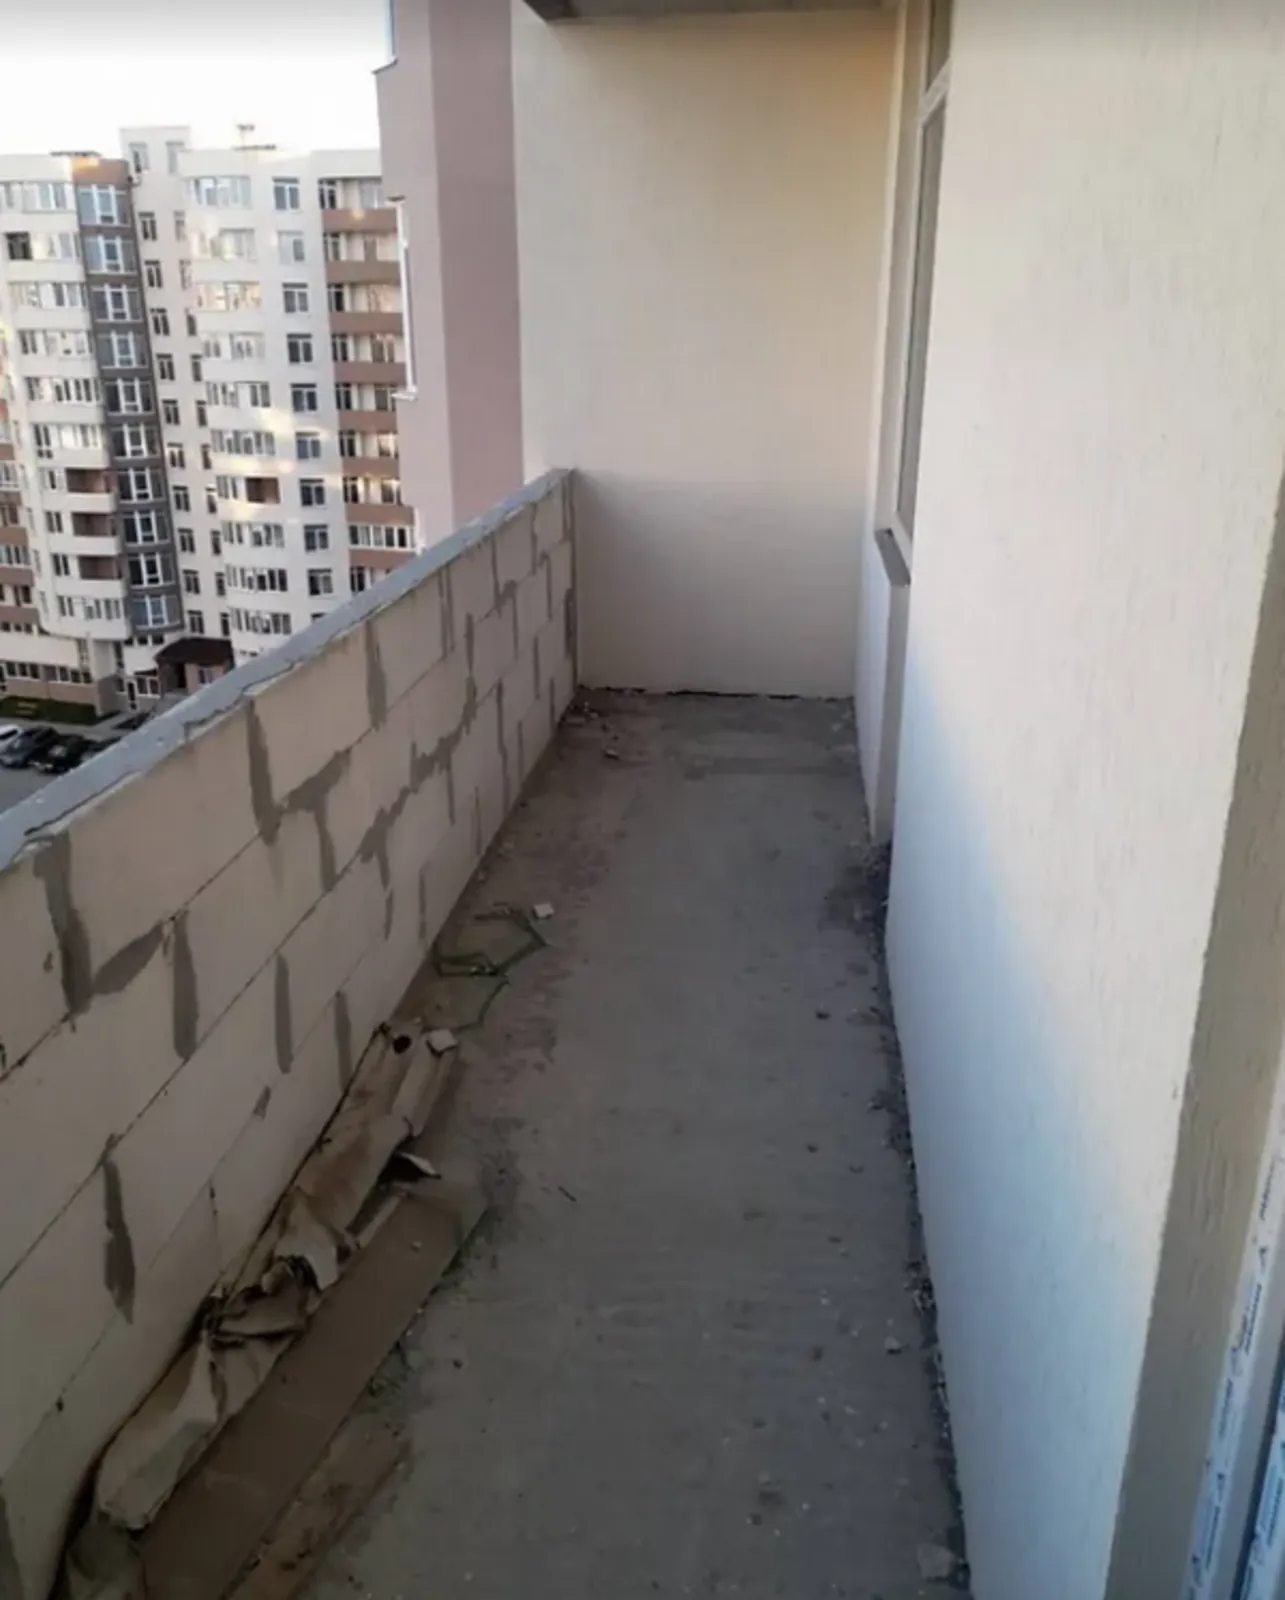 Apartments for sale. 2 rooms, 76 m², 11 floor/11 floors. Bam, Ternopil. 